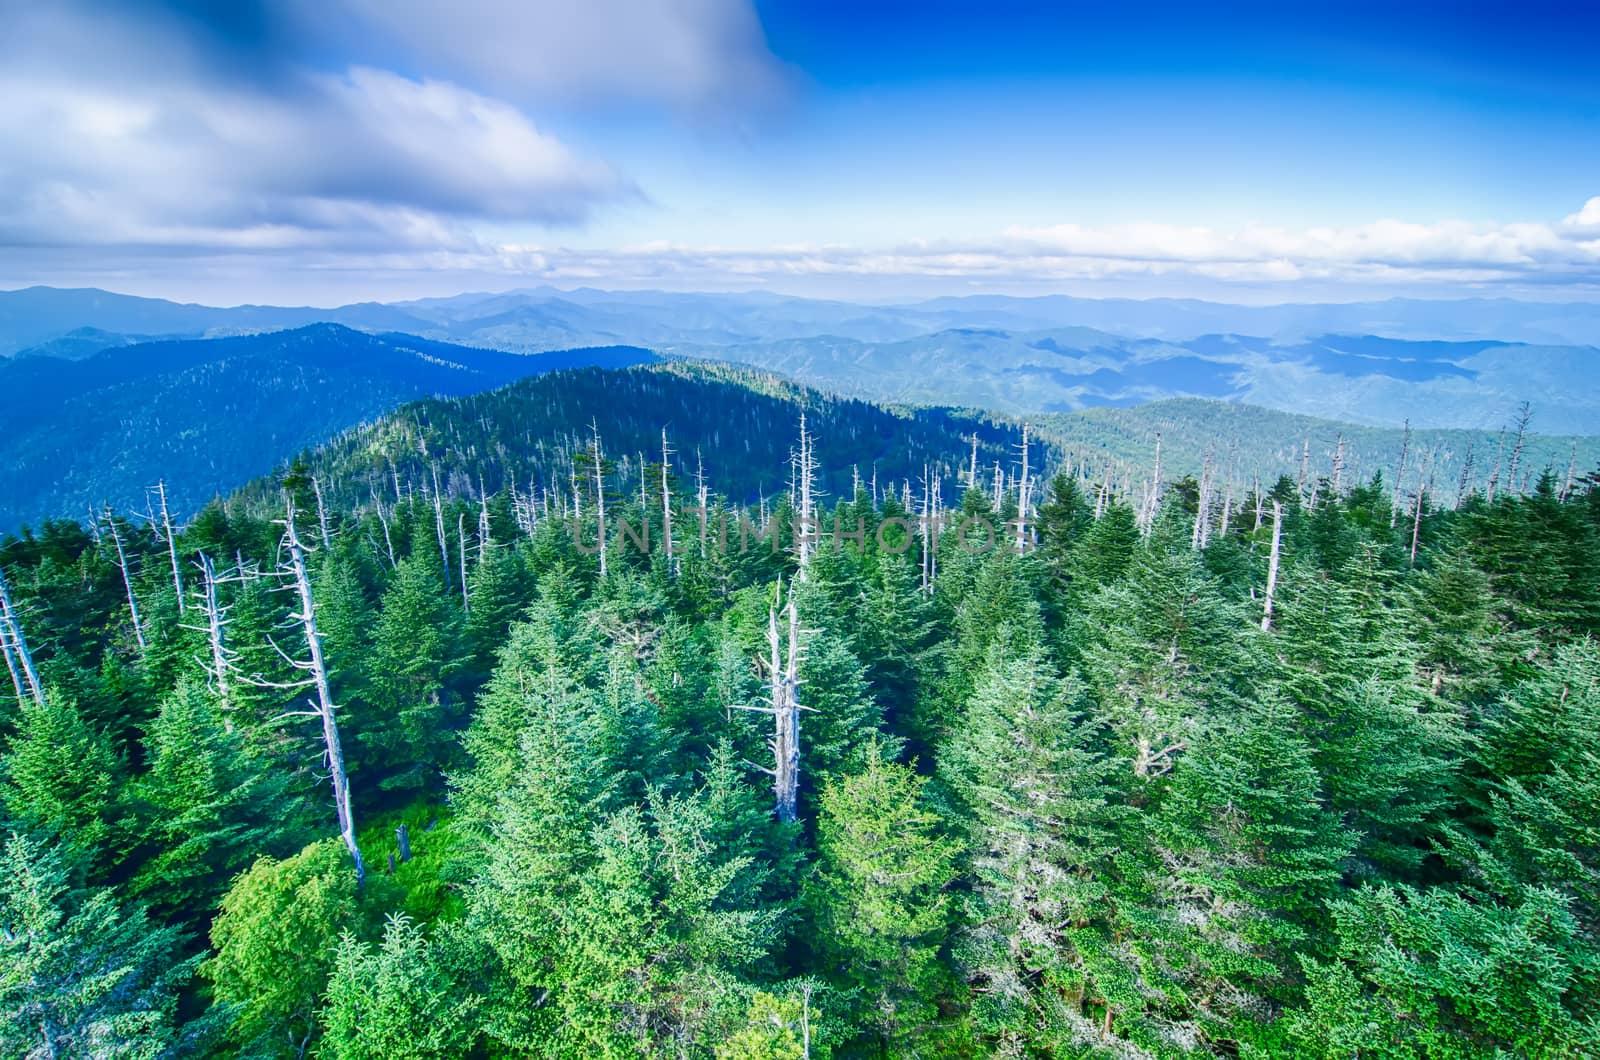 A wide view of the Great Smoky Mountains from the top of Clingma by digidreamgrafix